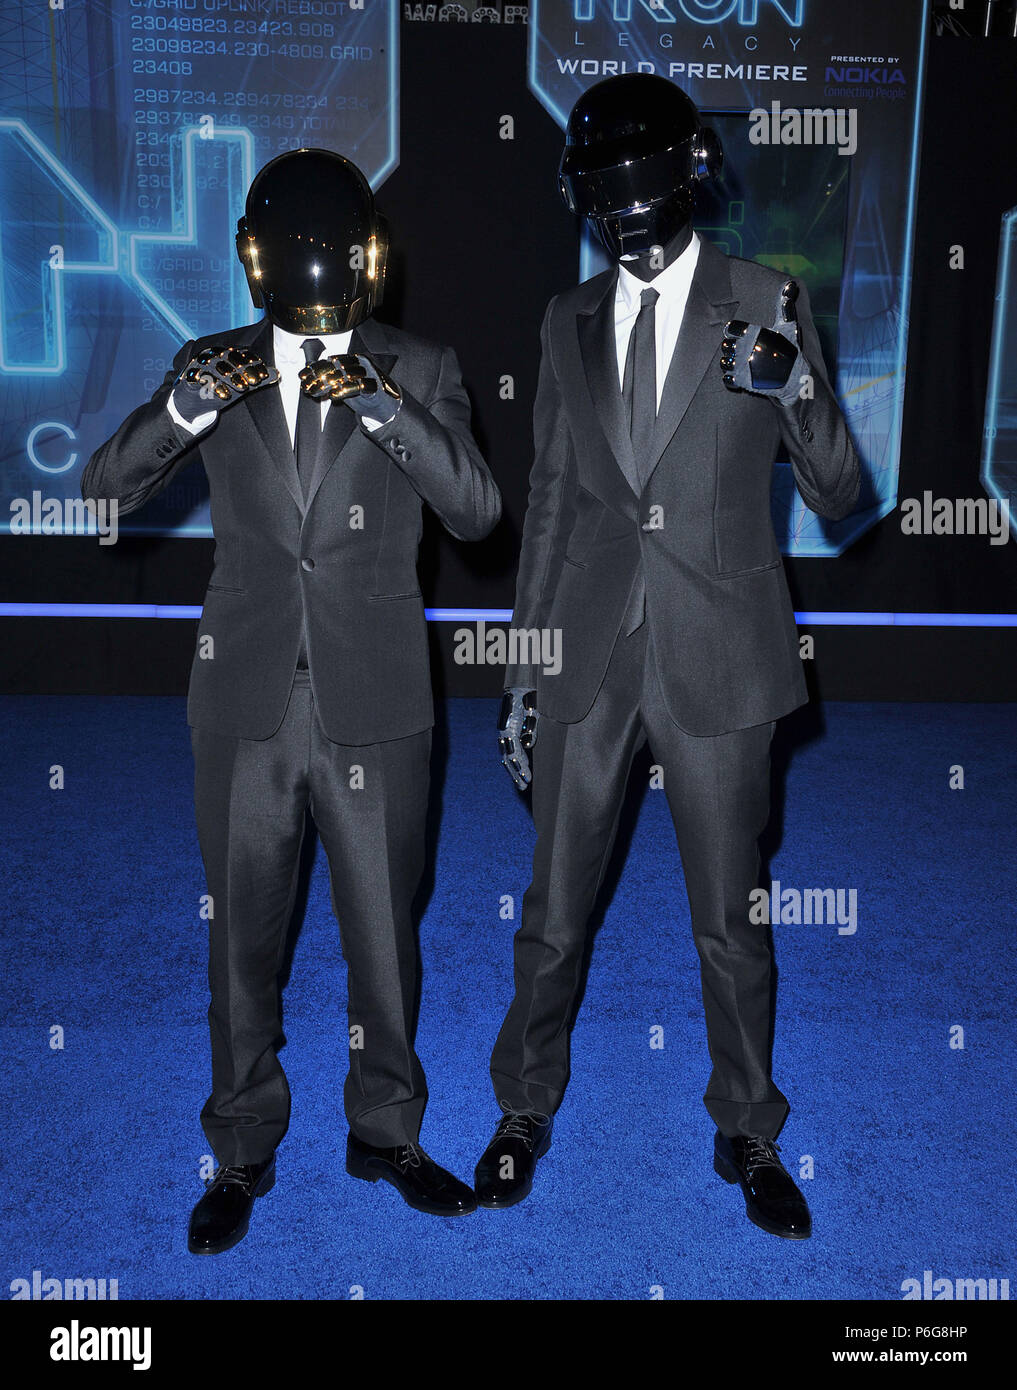 Daft Punk    - Tron: Legacy Premiere at the El Capitan Theatre In Los Angeles.a Daft Punk 09  Event in Hollywood Life - California, Red Carpet Event, USA, Film Industry, Celebrities, Photography, Bestof, Arts Culture and Entertainment, Topix Celebrities fashion, Best of, Hollywood Life, Event in Hollywood Life - California, Red Carpet and backstage, ,Arts Culture and Entertainment, Photography,    inquiry tsuni@Gamma-USA.com ,  Music celebrities, Musician, Music Group, 2010 Stock Photo